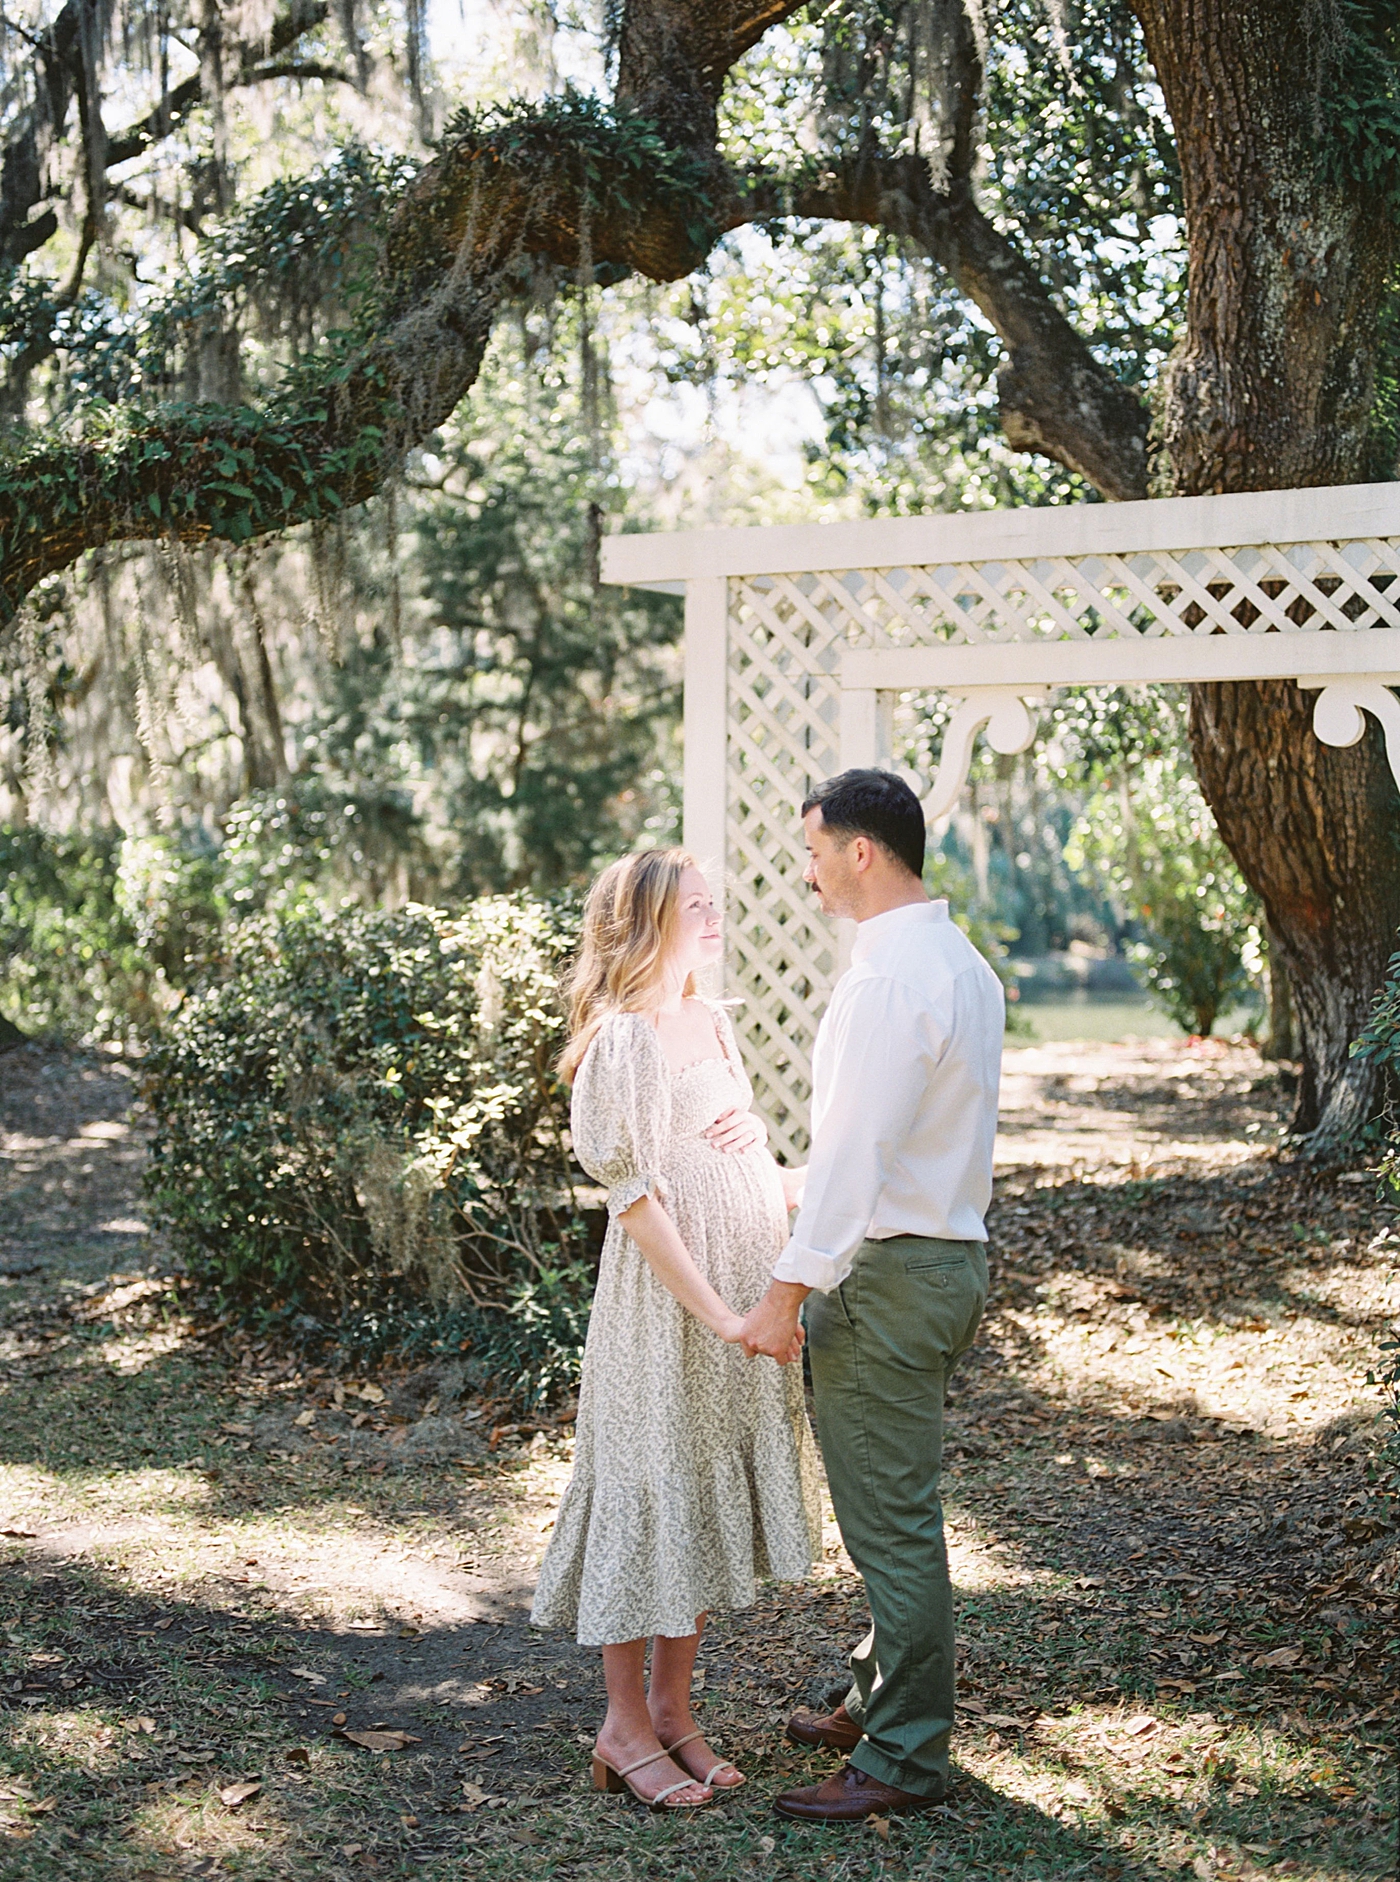 Husband and wife in a spring dress holding hands with her husband next to an arbor under moss-covered oak trees during their Maternity Session at Charlestowne Landing| Image by Caitlyn Motycka Photography